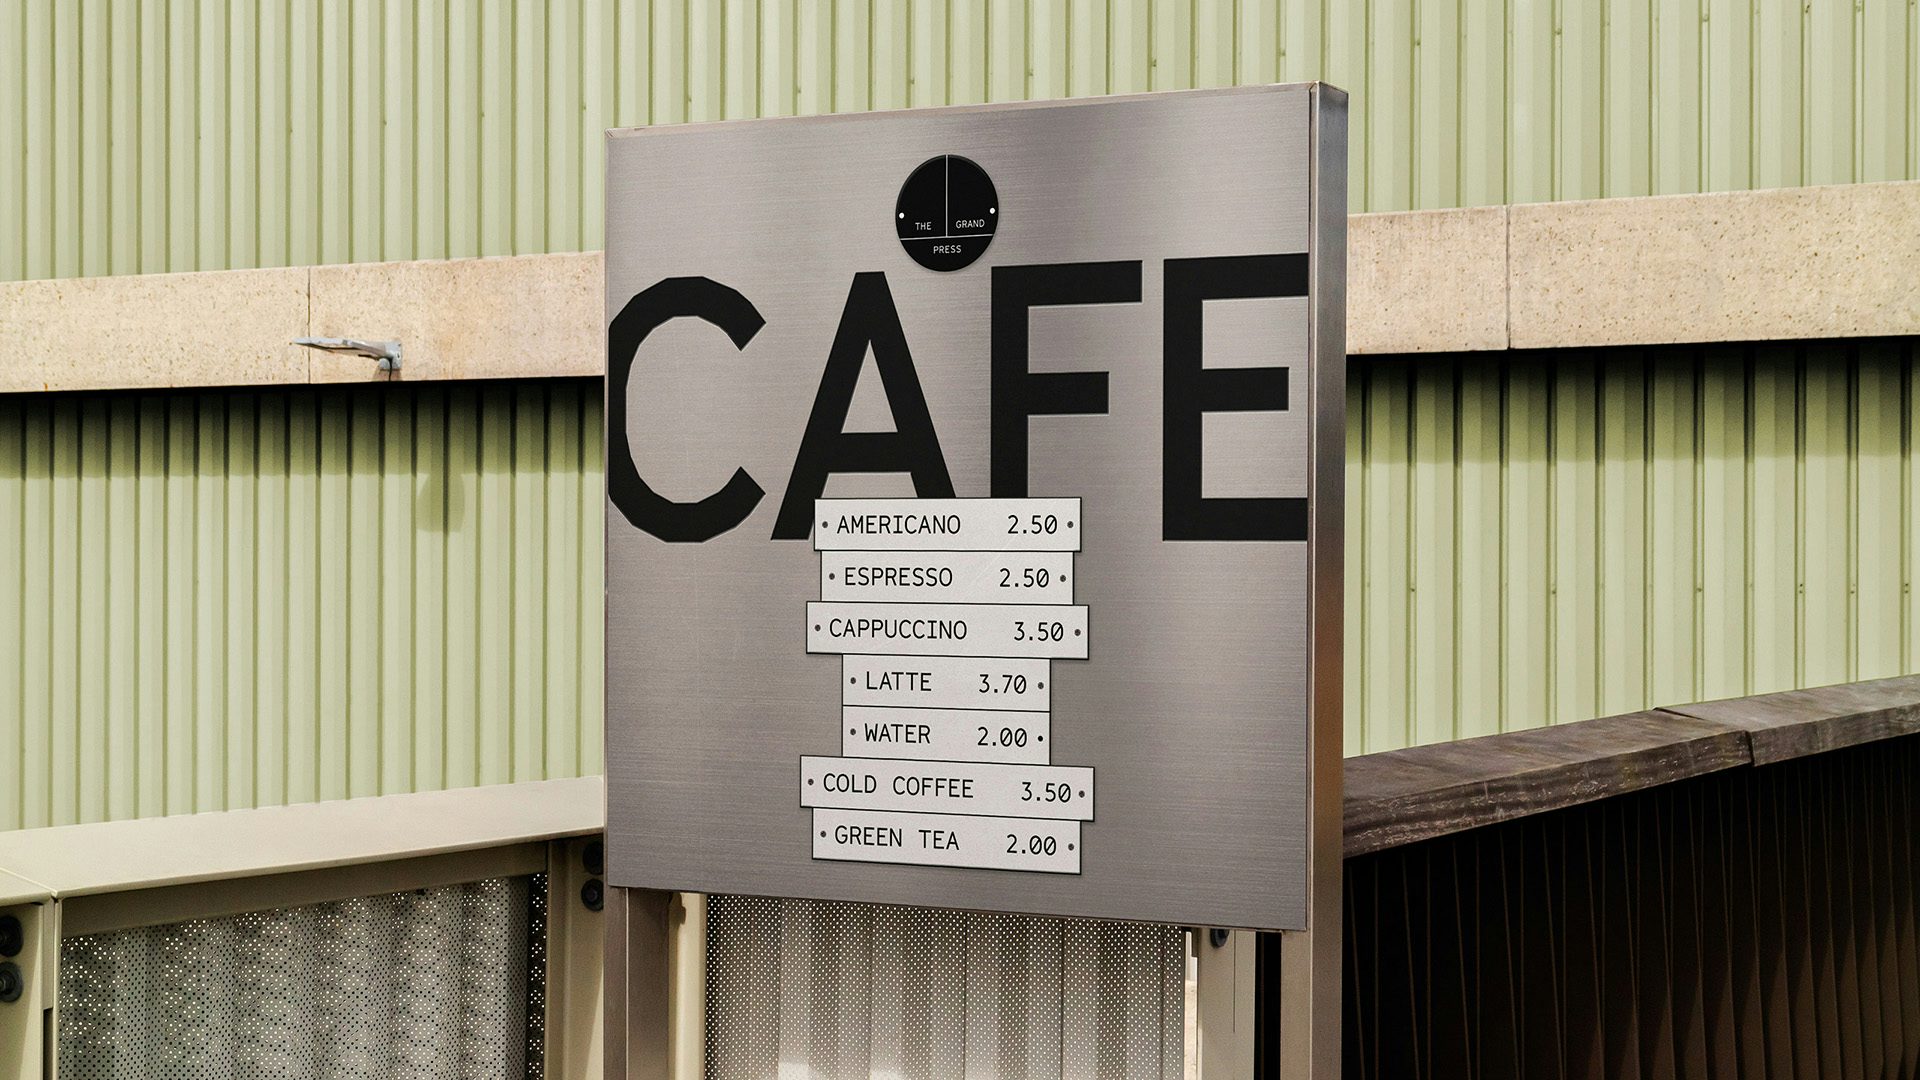 Image shows a menu for the Grand Press cafe featuring a price list on a grey background